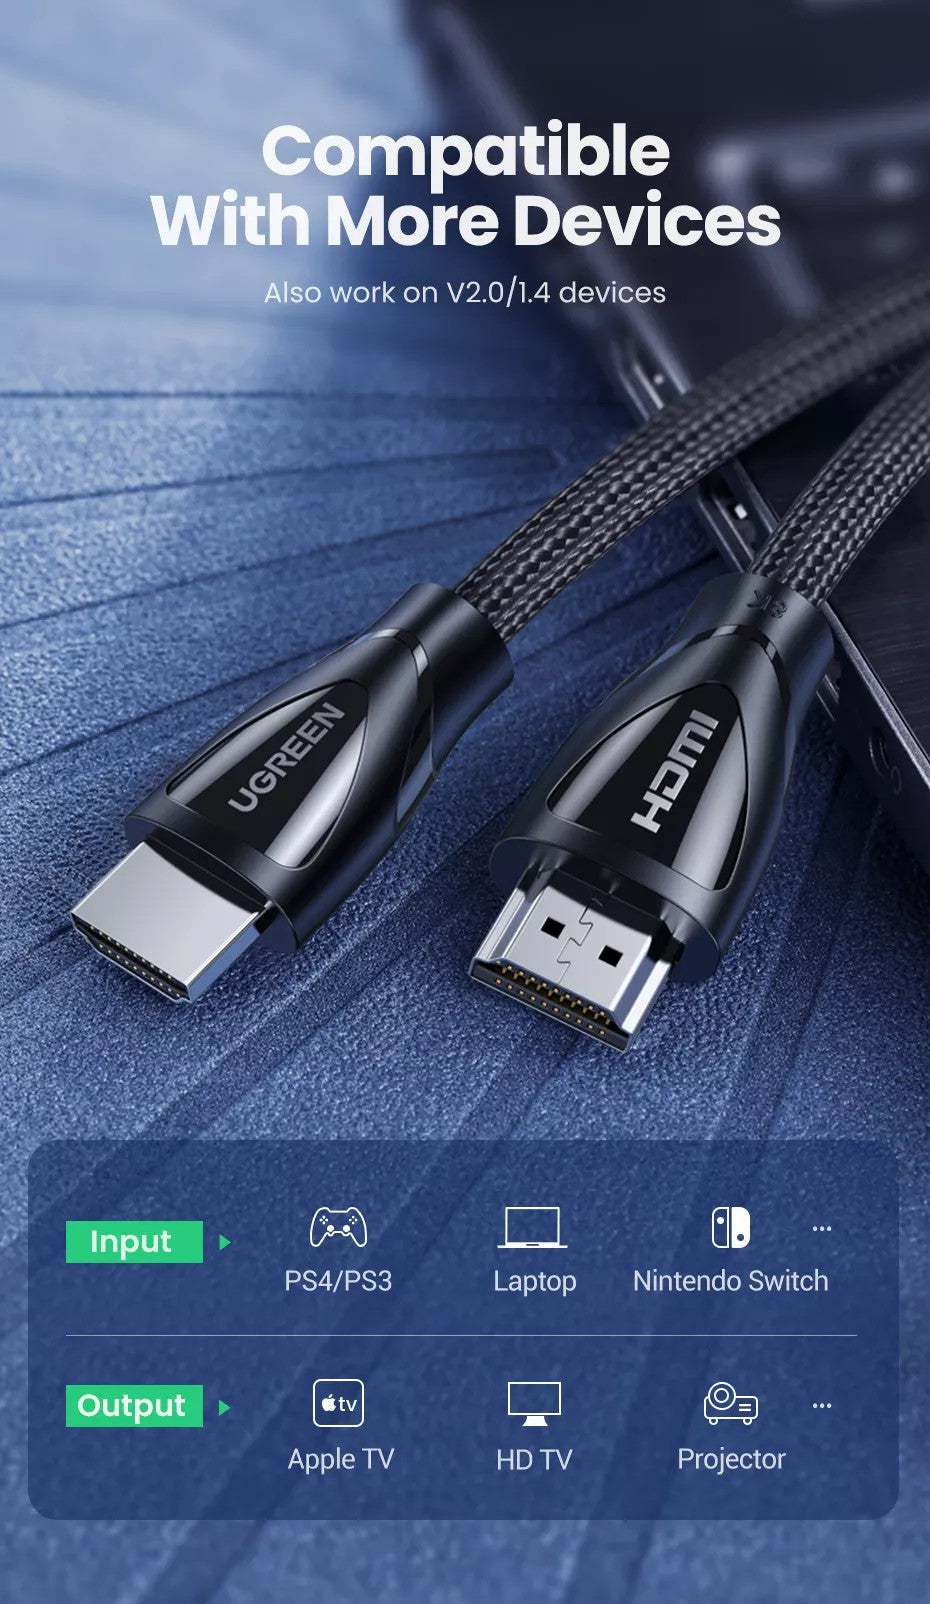 UGREEN HD140 HDMI 2.1 Cable 8K/60Hz 4K/120Hz for Xiaomi Mi Box HDMI2.1 Cable 48Gbps HDR10+ HDCP2.2 for PS4 HDMI Splitter 8K HDMI Cable Length 1.5M